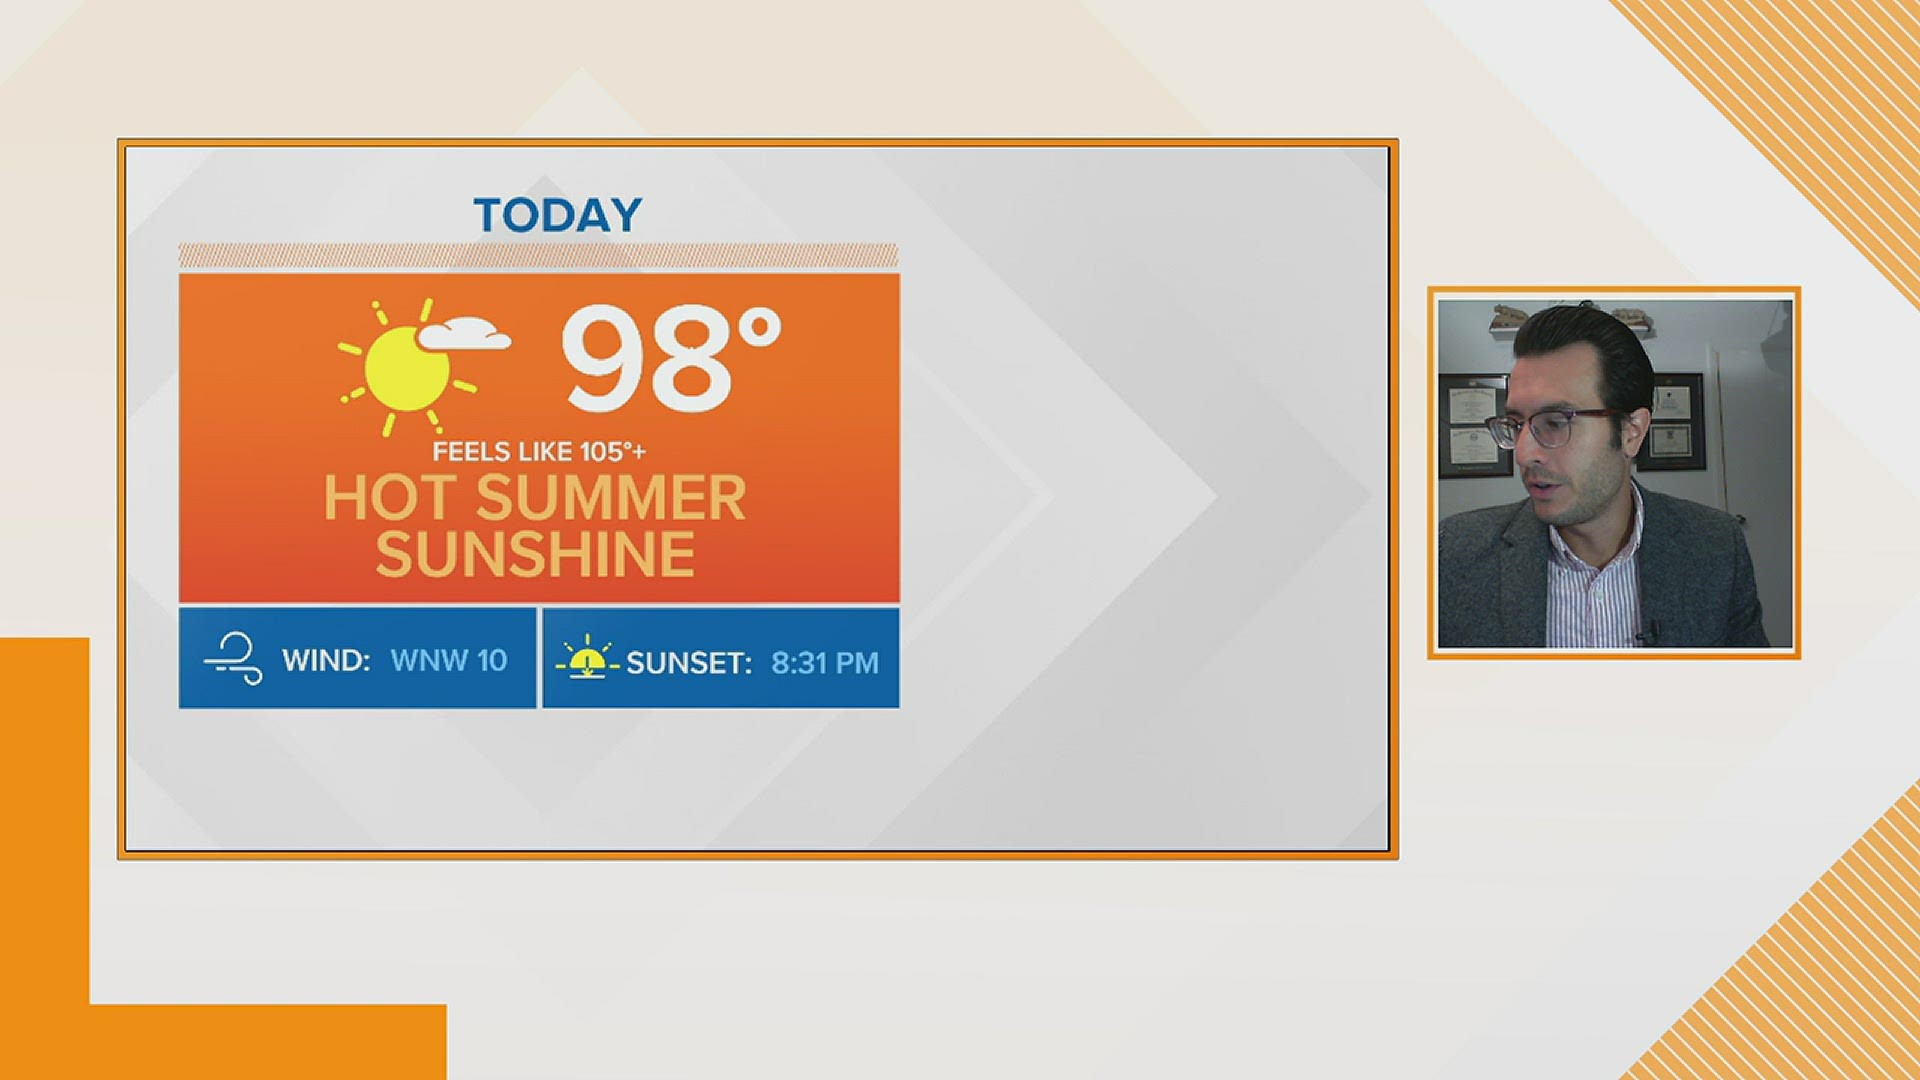 Sunday becomes a scorcher without those cooling thunderstorms - temperatures near 100°, feeling close to 105°+.